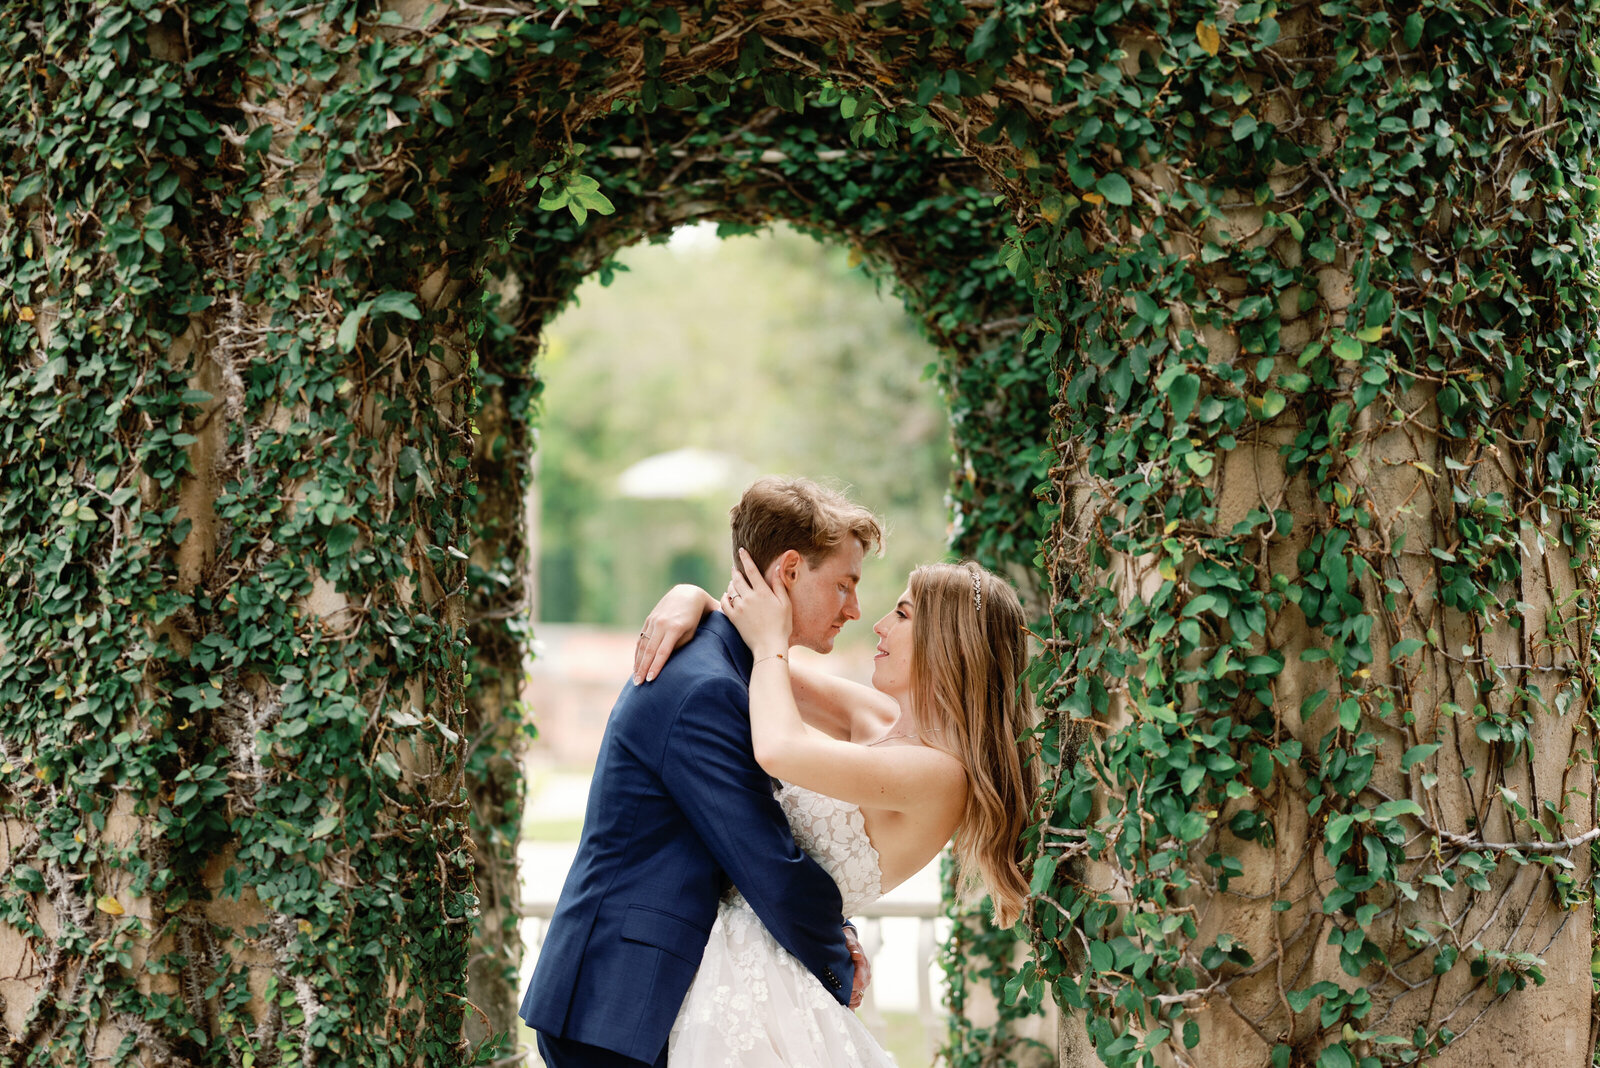 Groom leaning over slightly to kiss his bride in a ivy covered garden archway